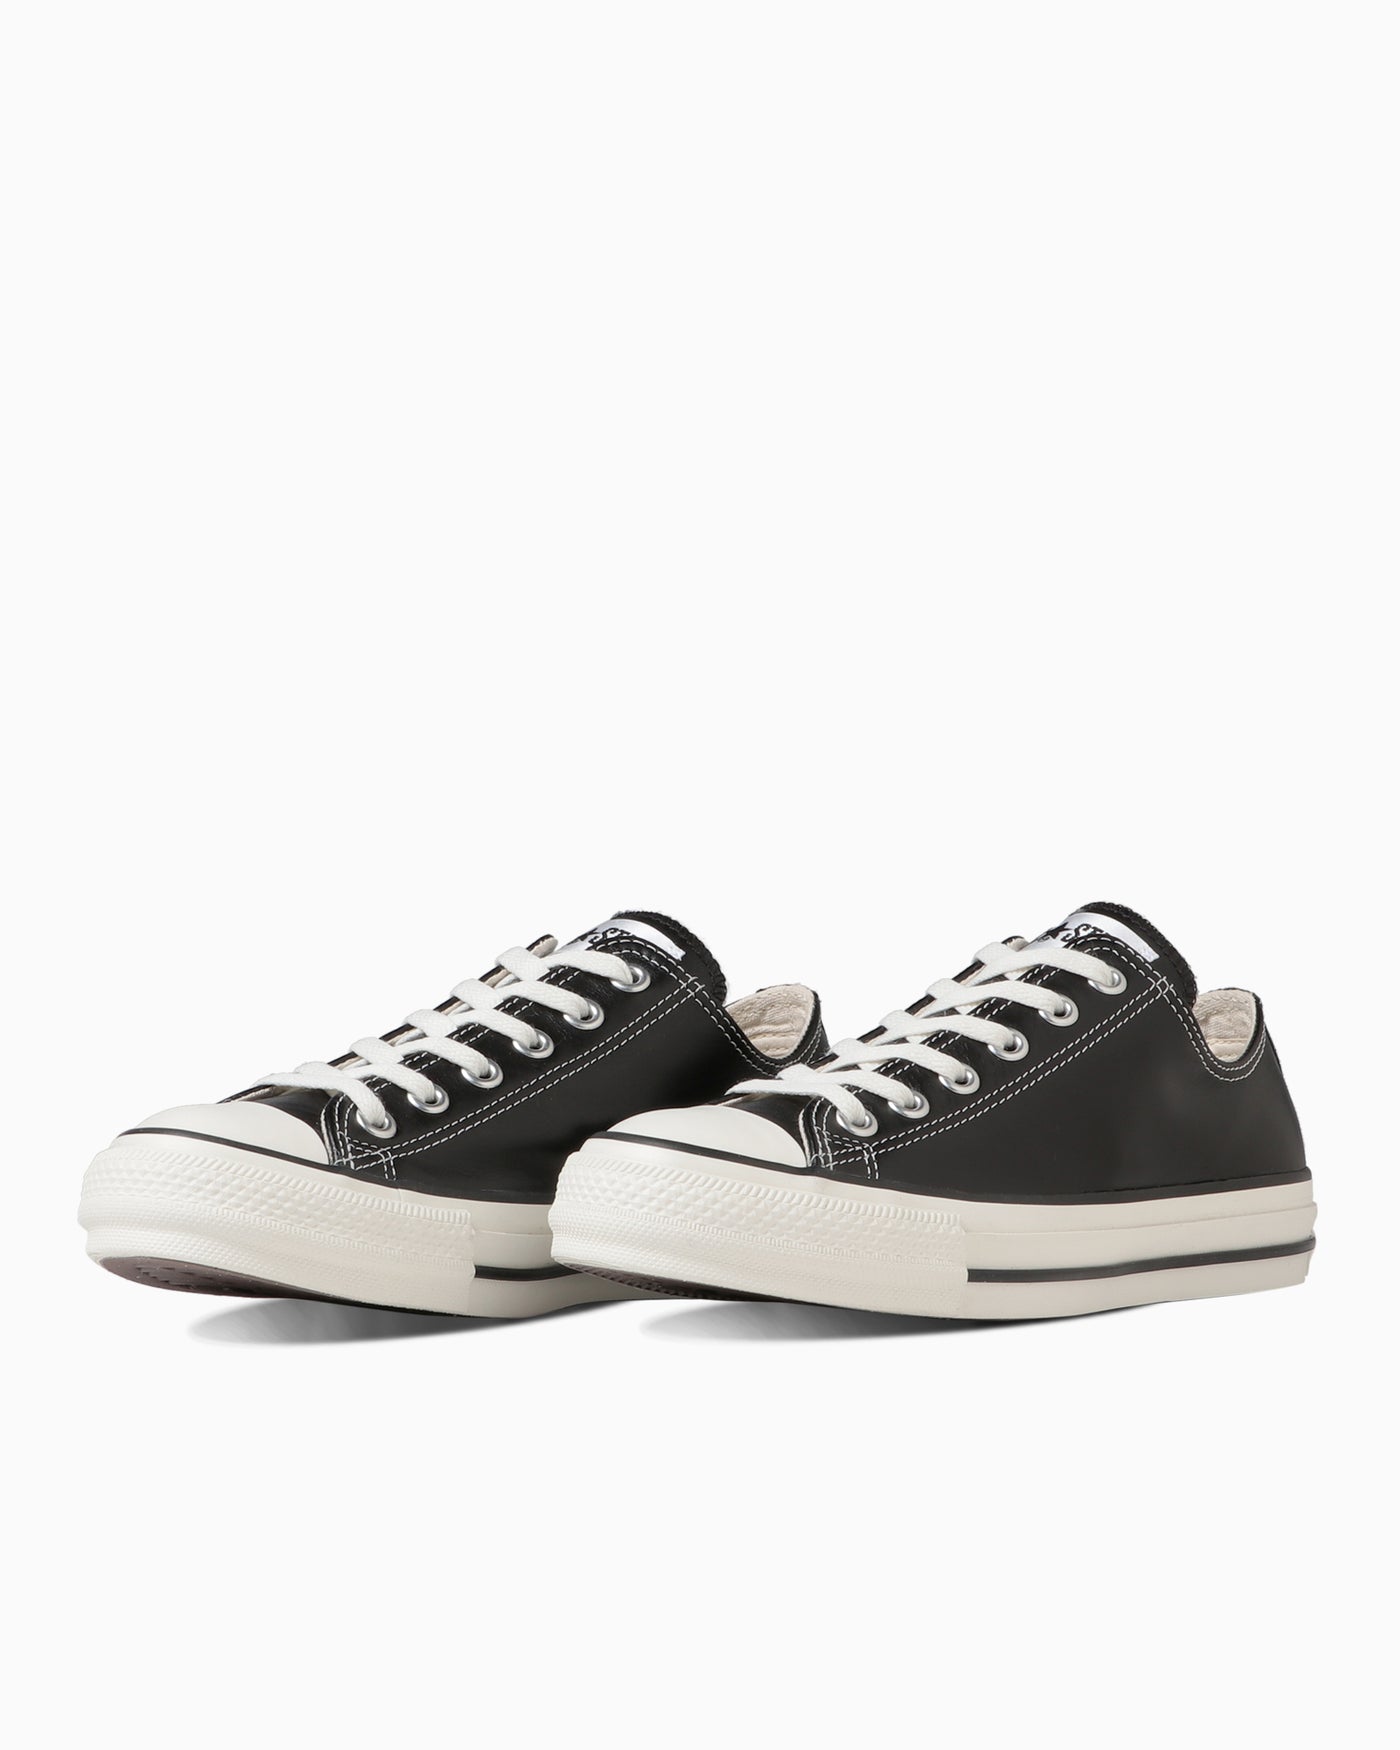 ALL STAR Ⓡ OLIVE GREEN LEATHER OX